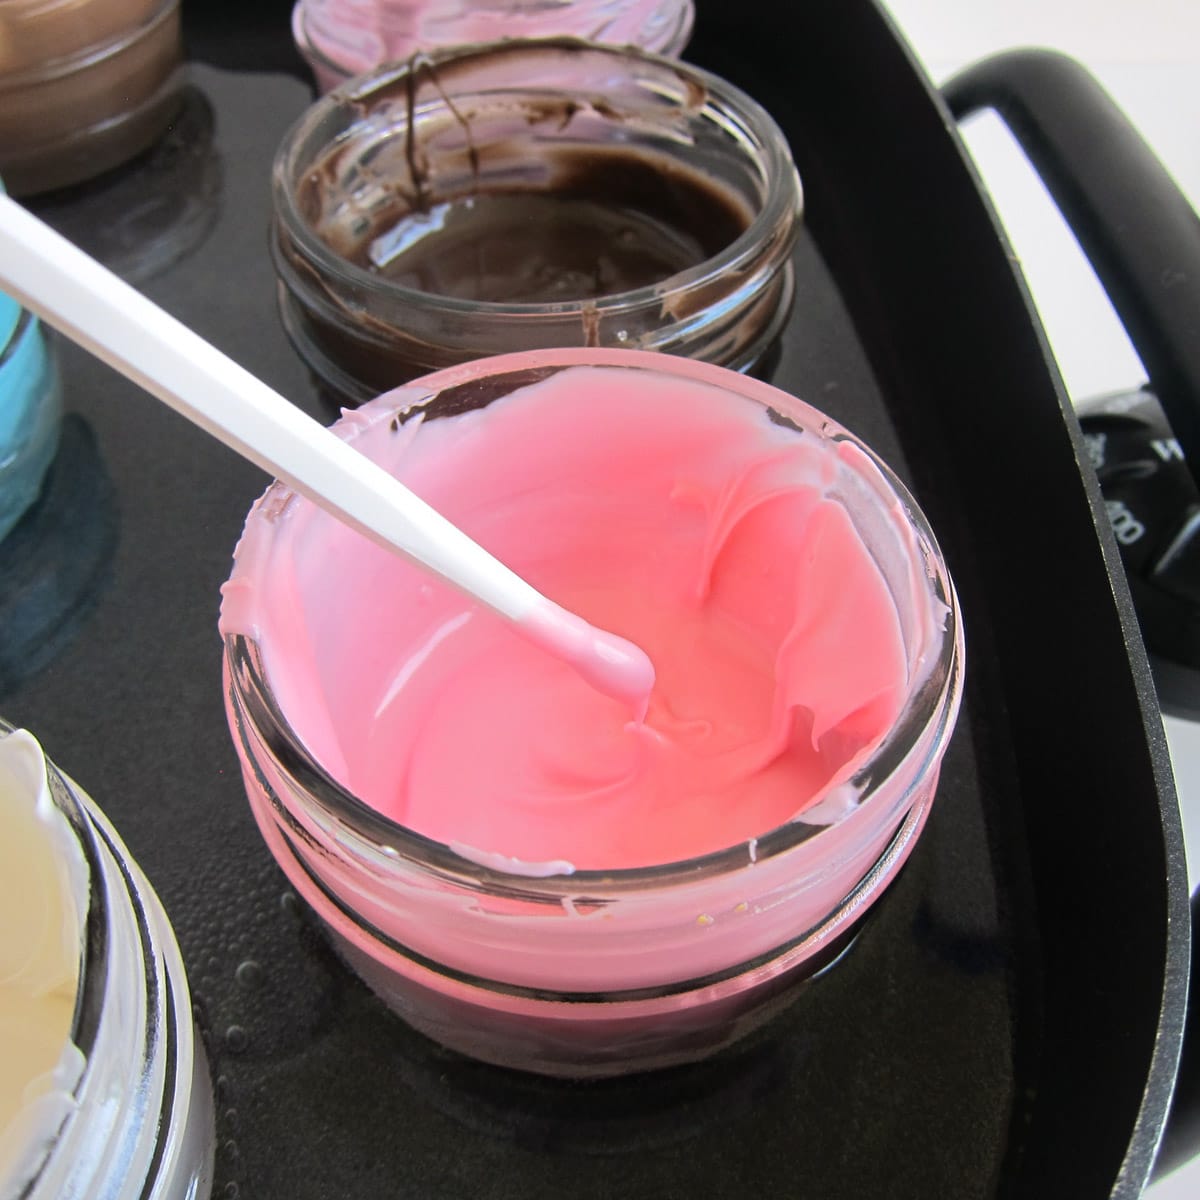 Dip a paint brush into melted pink candy melts that are in a jar in a water bath in an electric skillet.